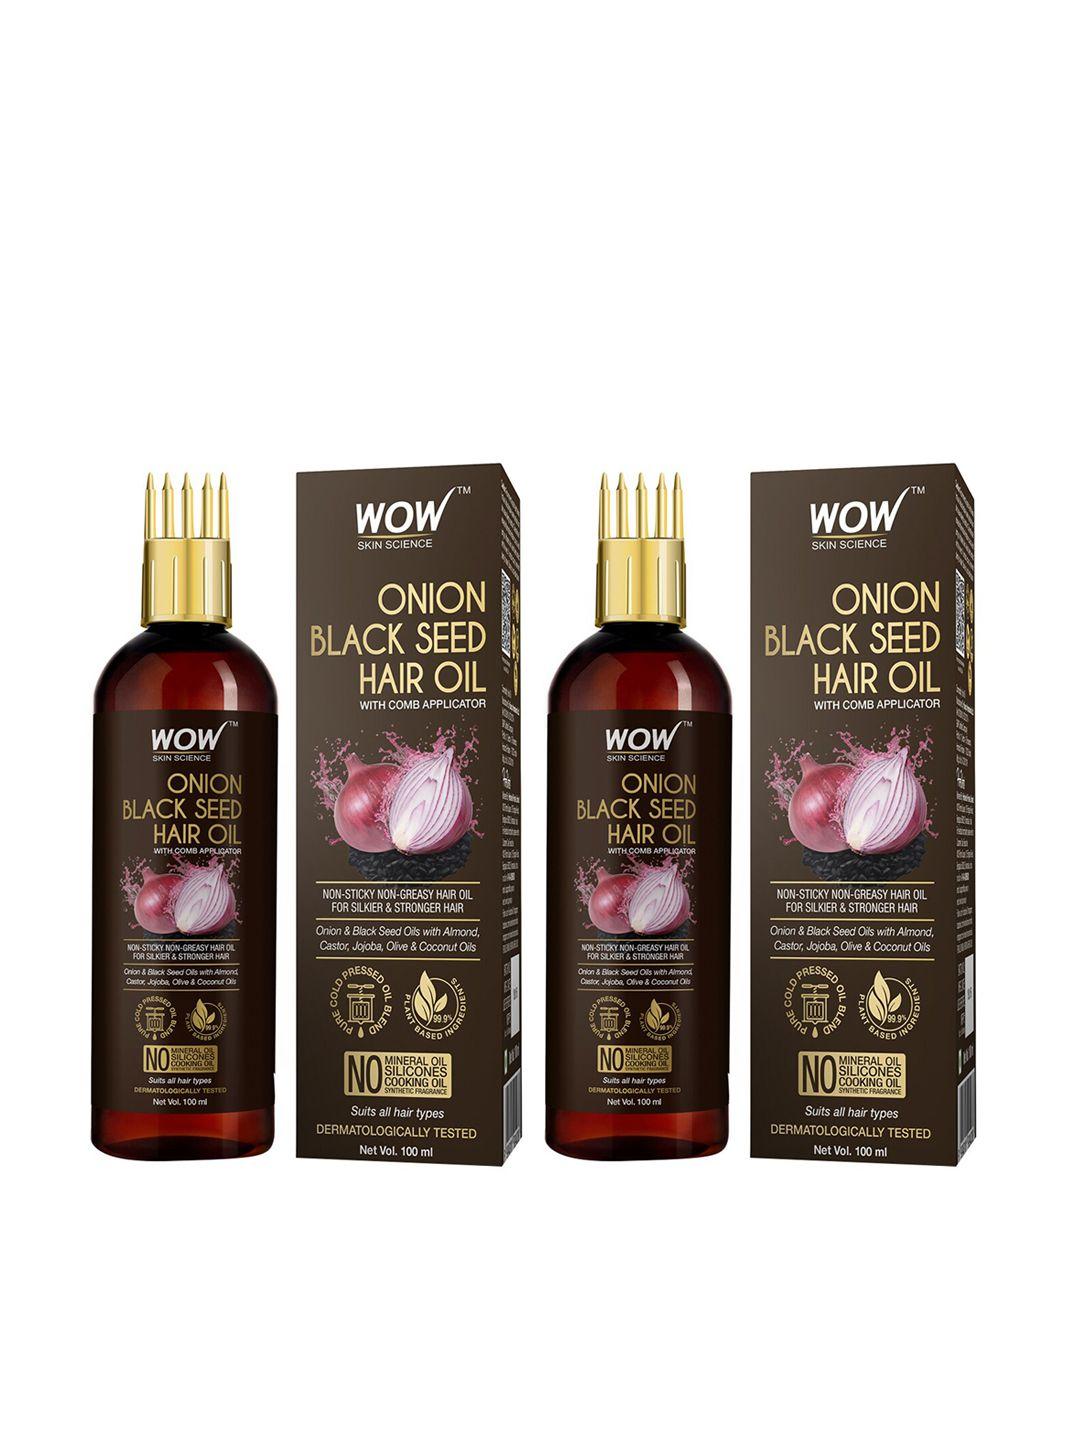 wow skin science set of 2 onion black seed hair oil with comb applicator